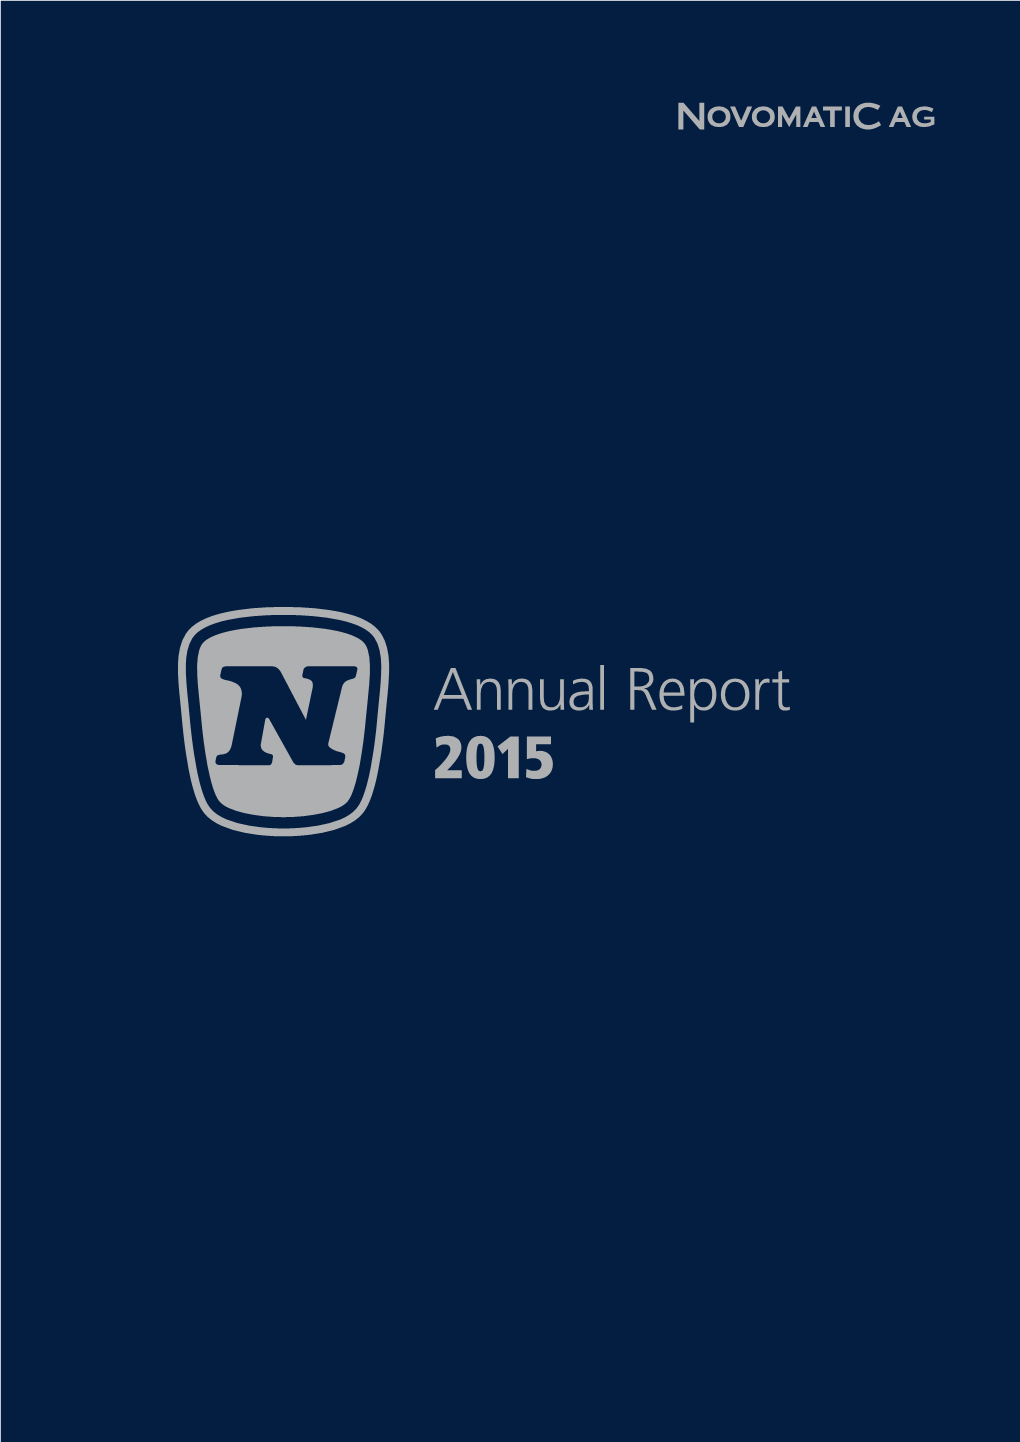 Annual Report 2015 Overview of Key Figures